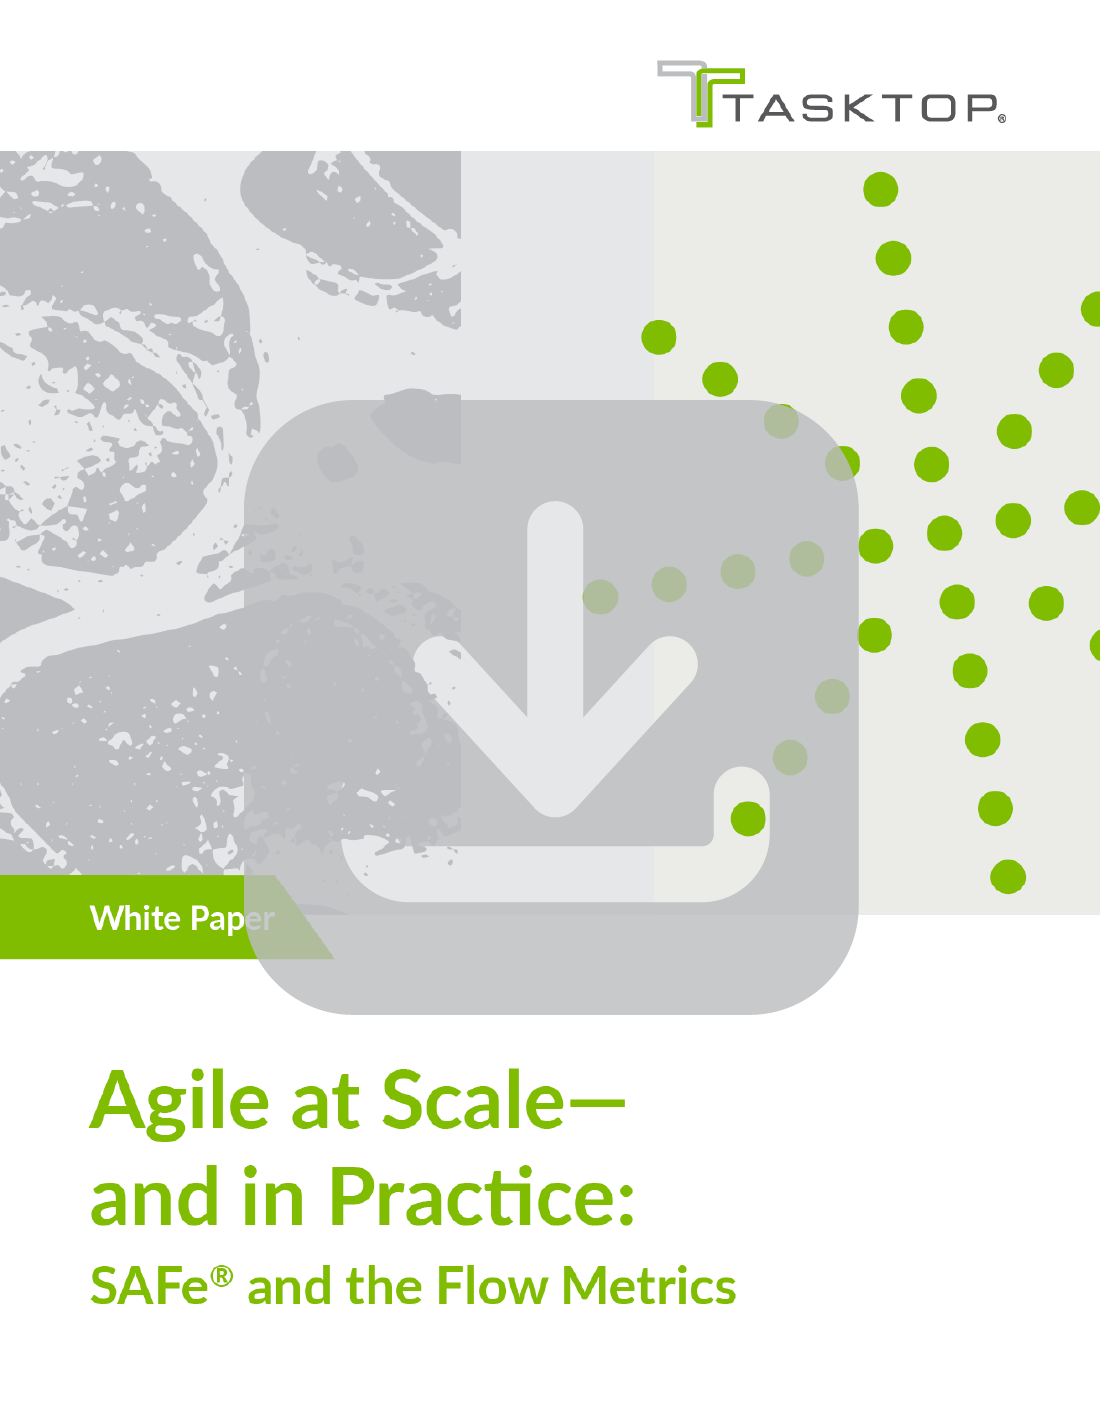 Agile at Scale—and in Practice: SAFe® and the Flow Metrics